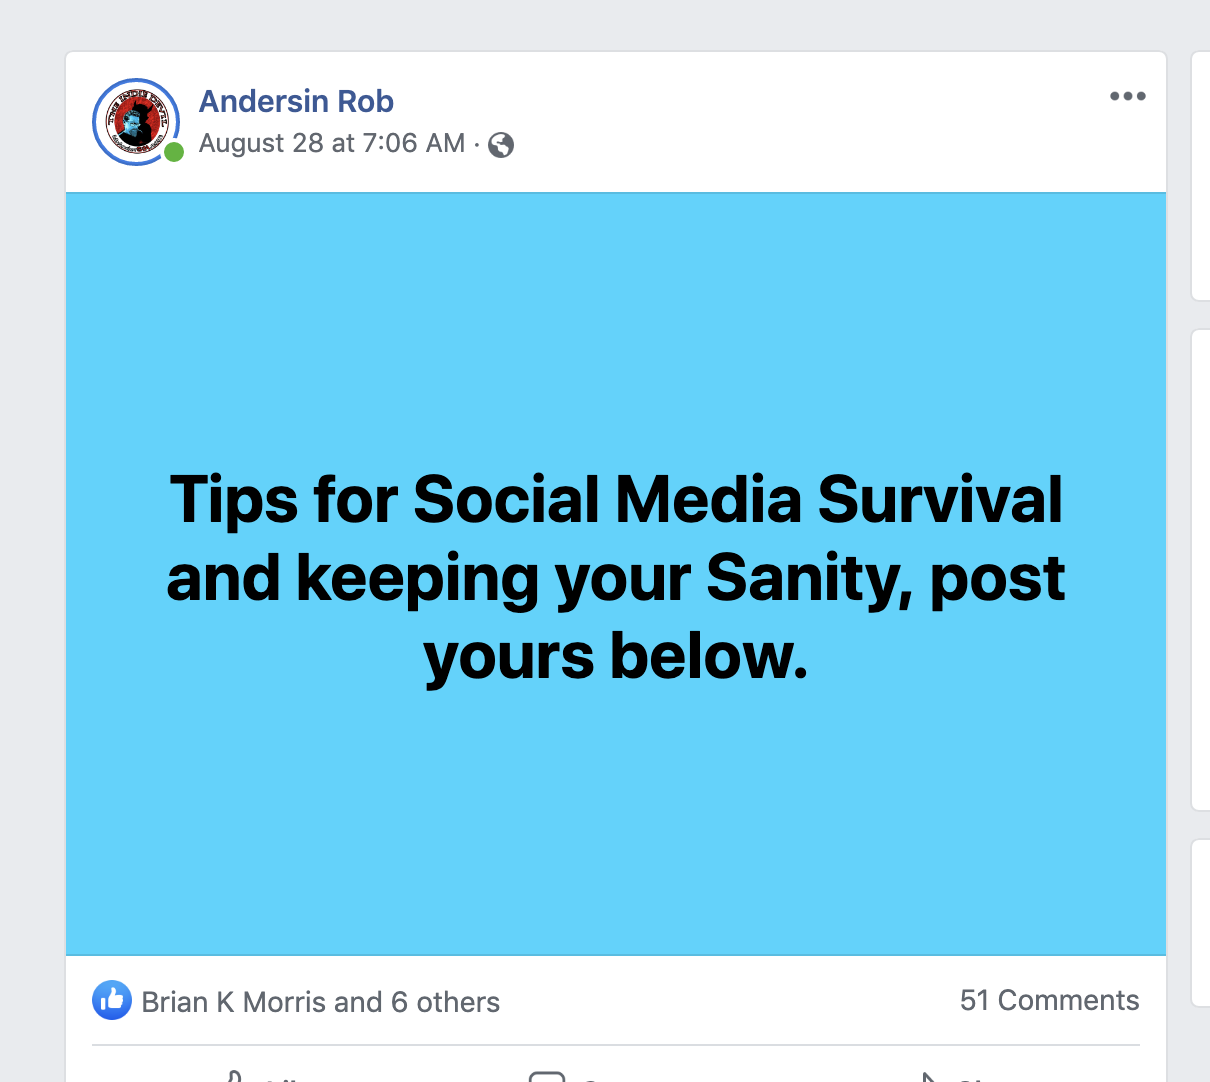 Tips for Social Media Survival and keeping your Sanity by INDIE CREATORS